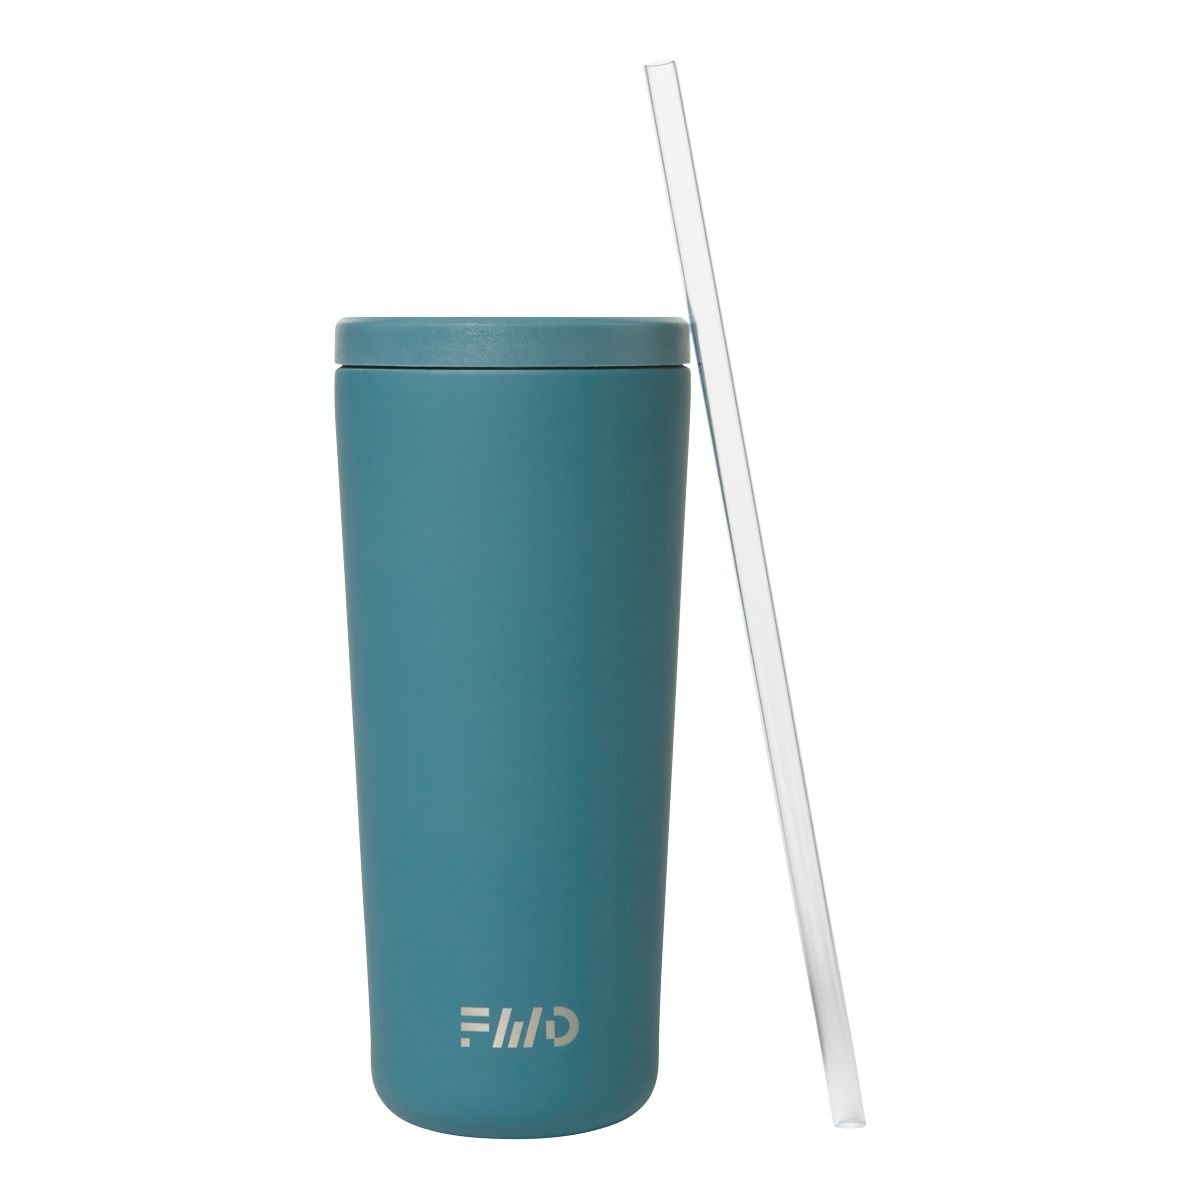 https://media-www.sportchek.ca/product/div-01-hardgoods/dpt-38-hydration/sdpt-14-stainless-steel/333808982/fwd-luxe-insulated-straw-tumbler-c2e1c922-d892-4804-9259-817e56f21cd9-jpgrendition.jpg?imdensity=1&imwidth=1244&impolicy=mZoom